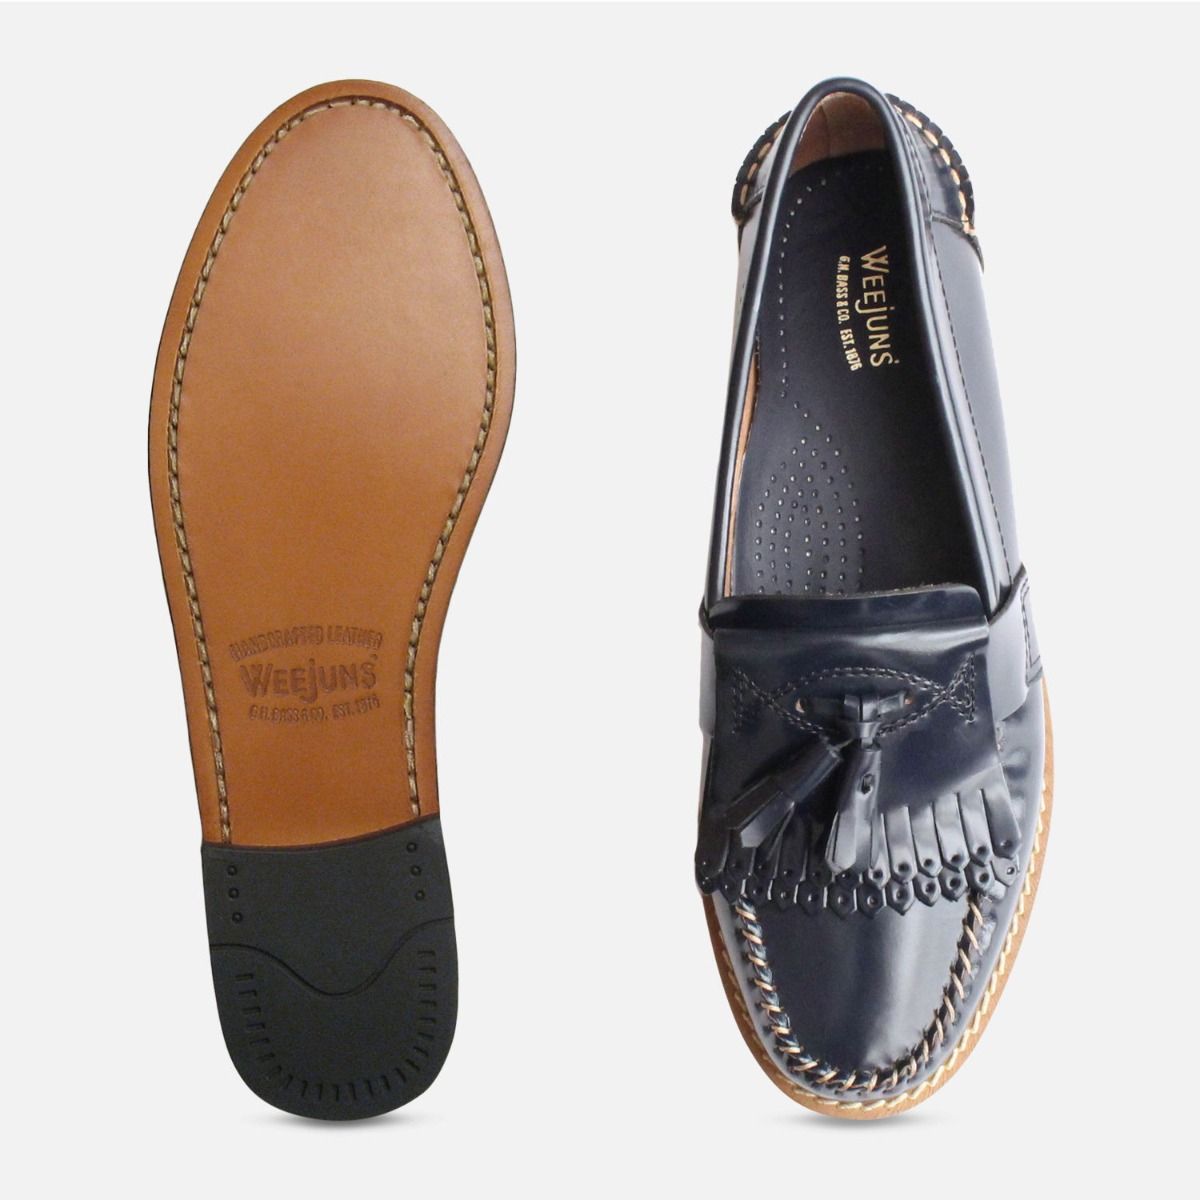 navy loafer shoes ladies